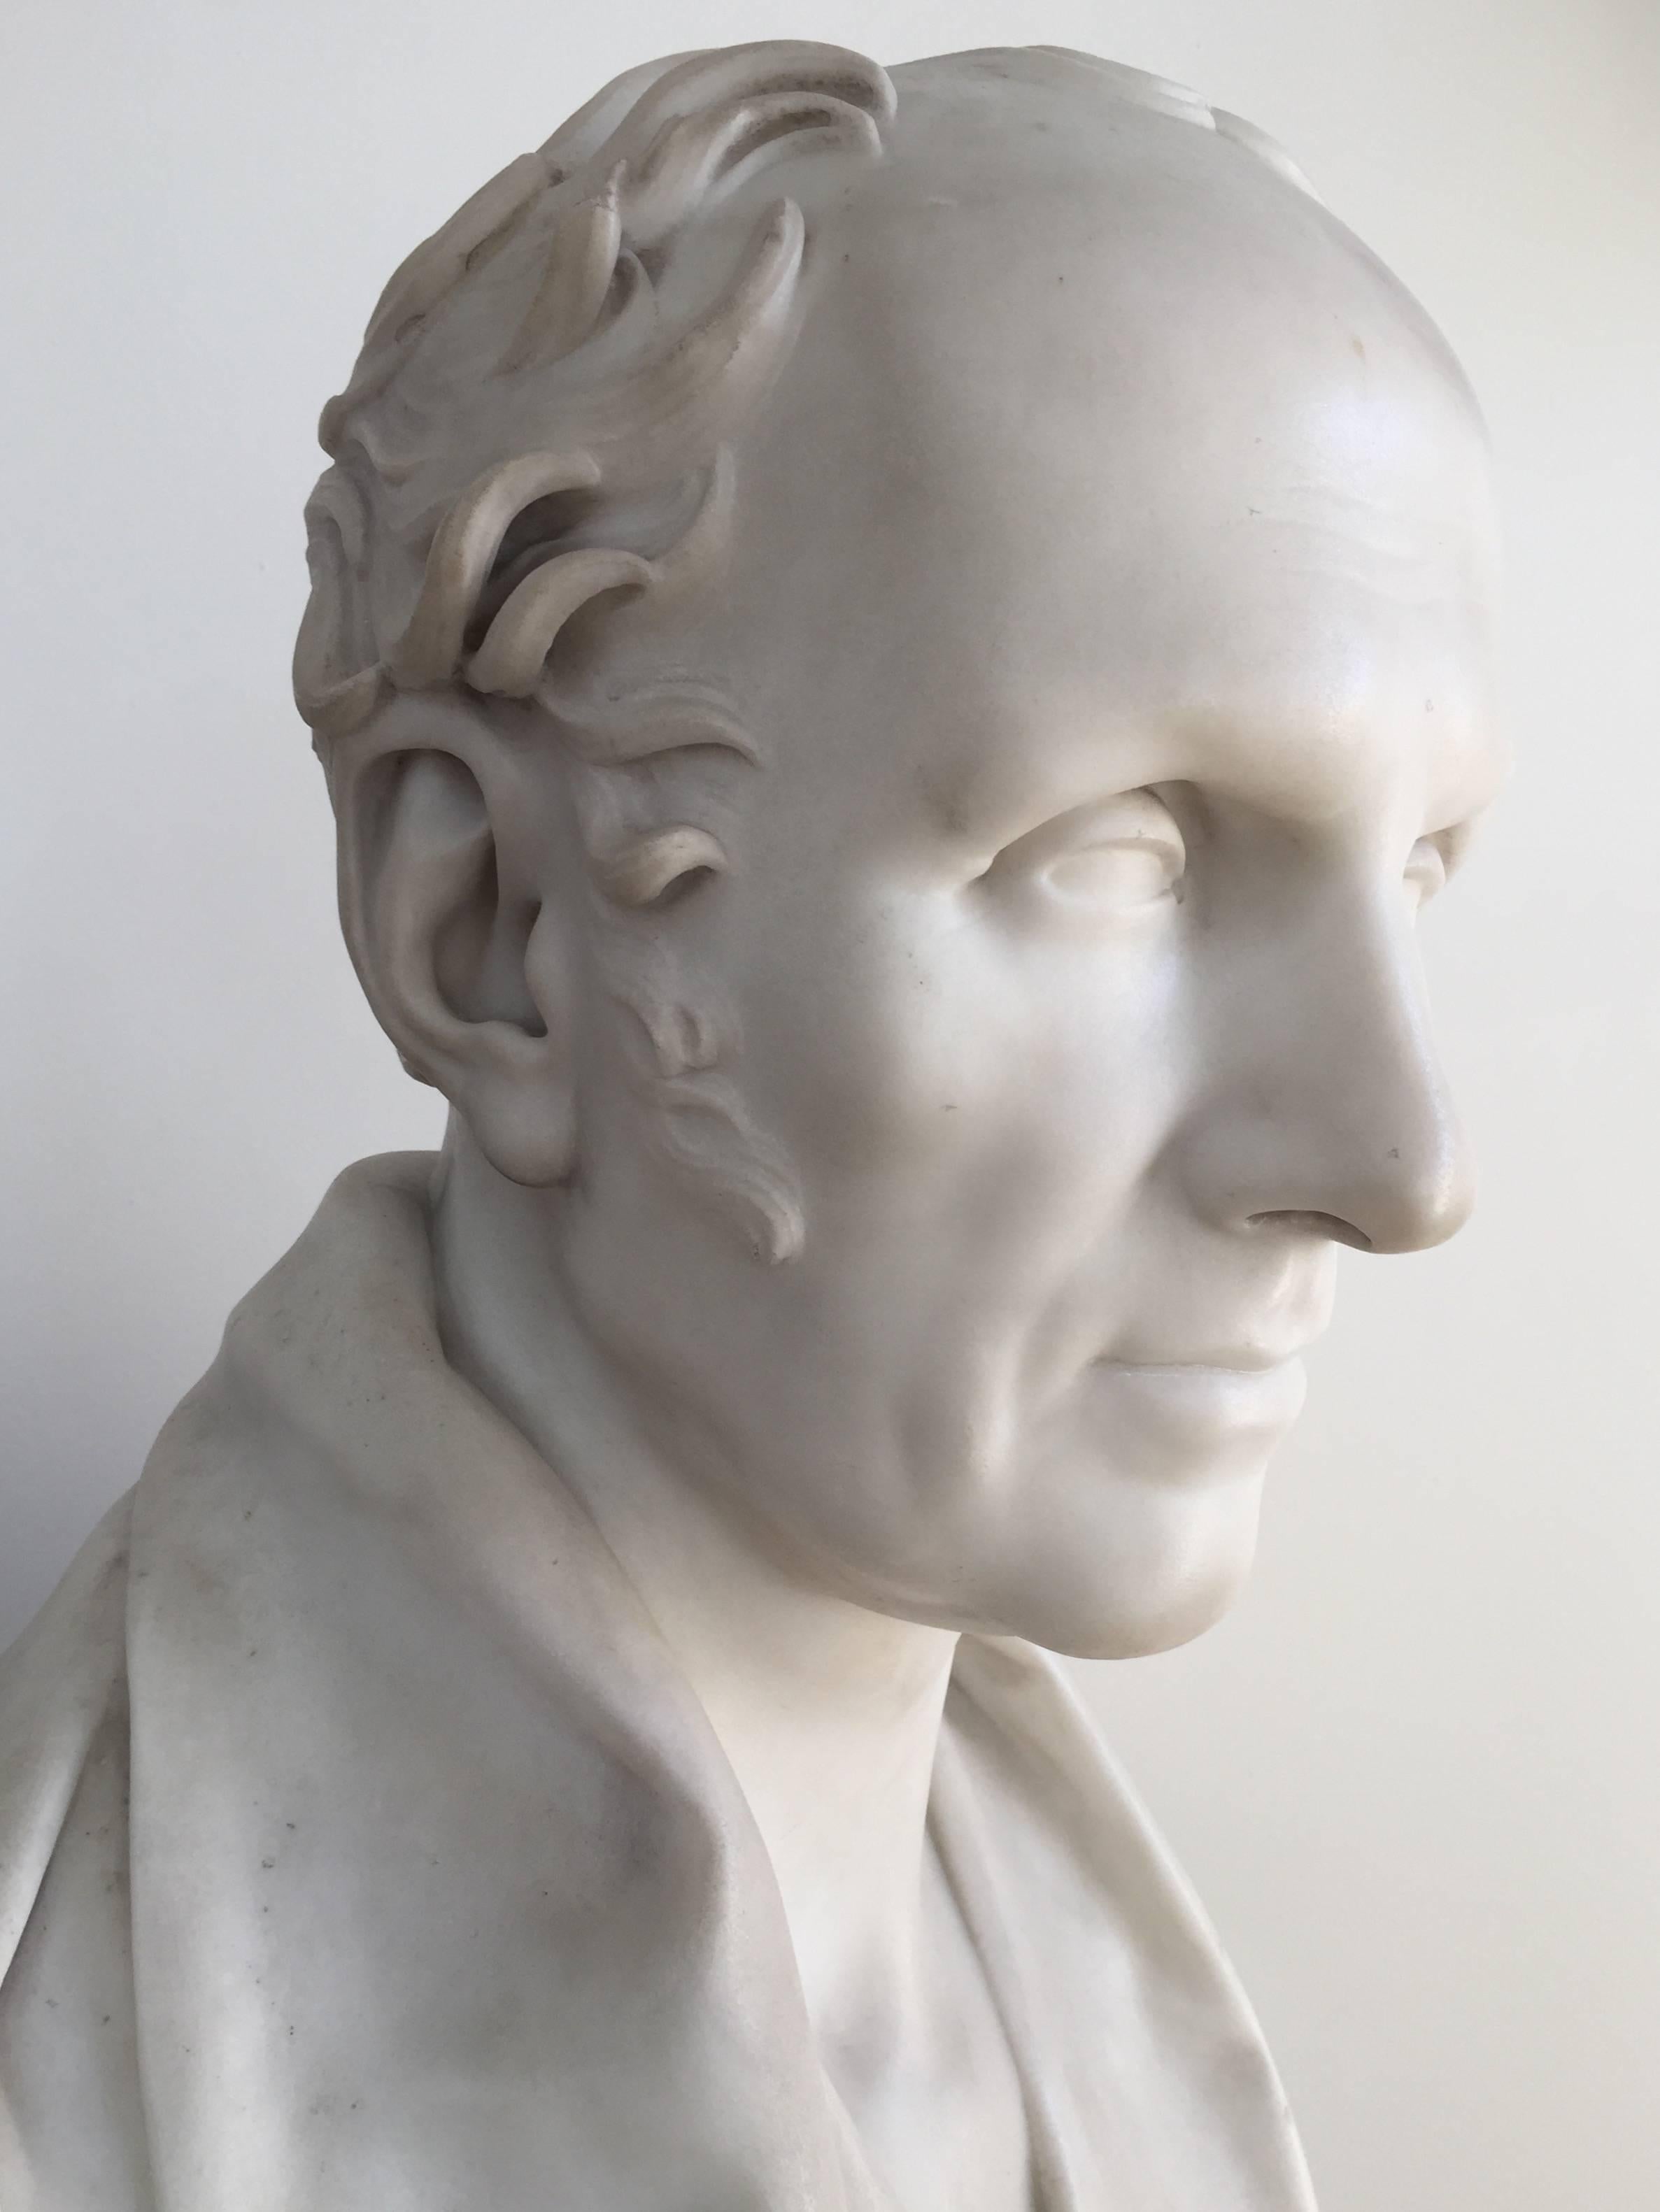 A fine and important Carrara marble portrait bust by the leading sculptor of the day Sir Francis Chantrey of James Dunlop of Glasgow.

The Chantrey ledger provides the following information in in respect of the James Dunlop commission:

1836